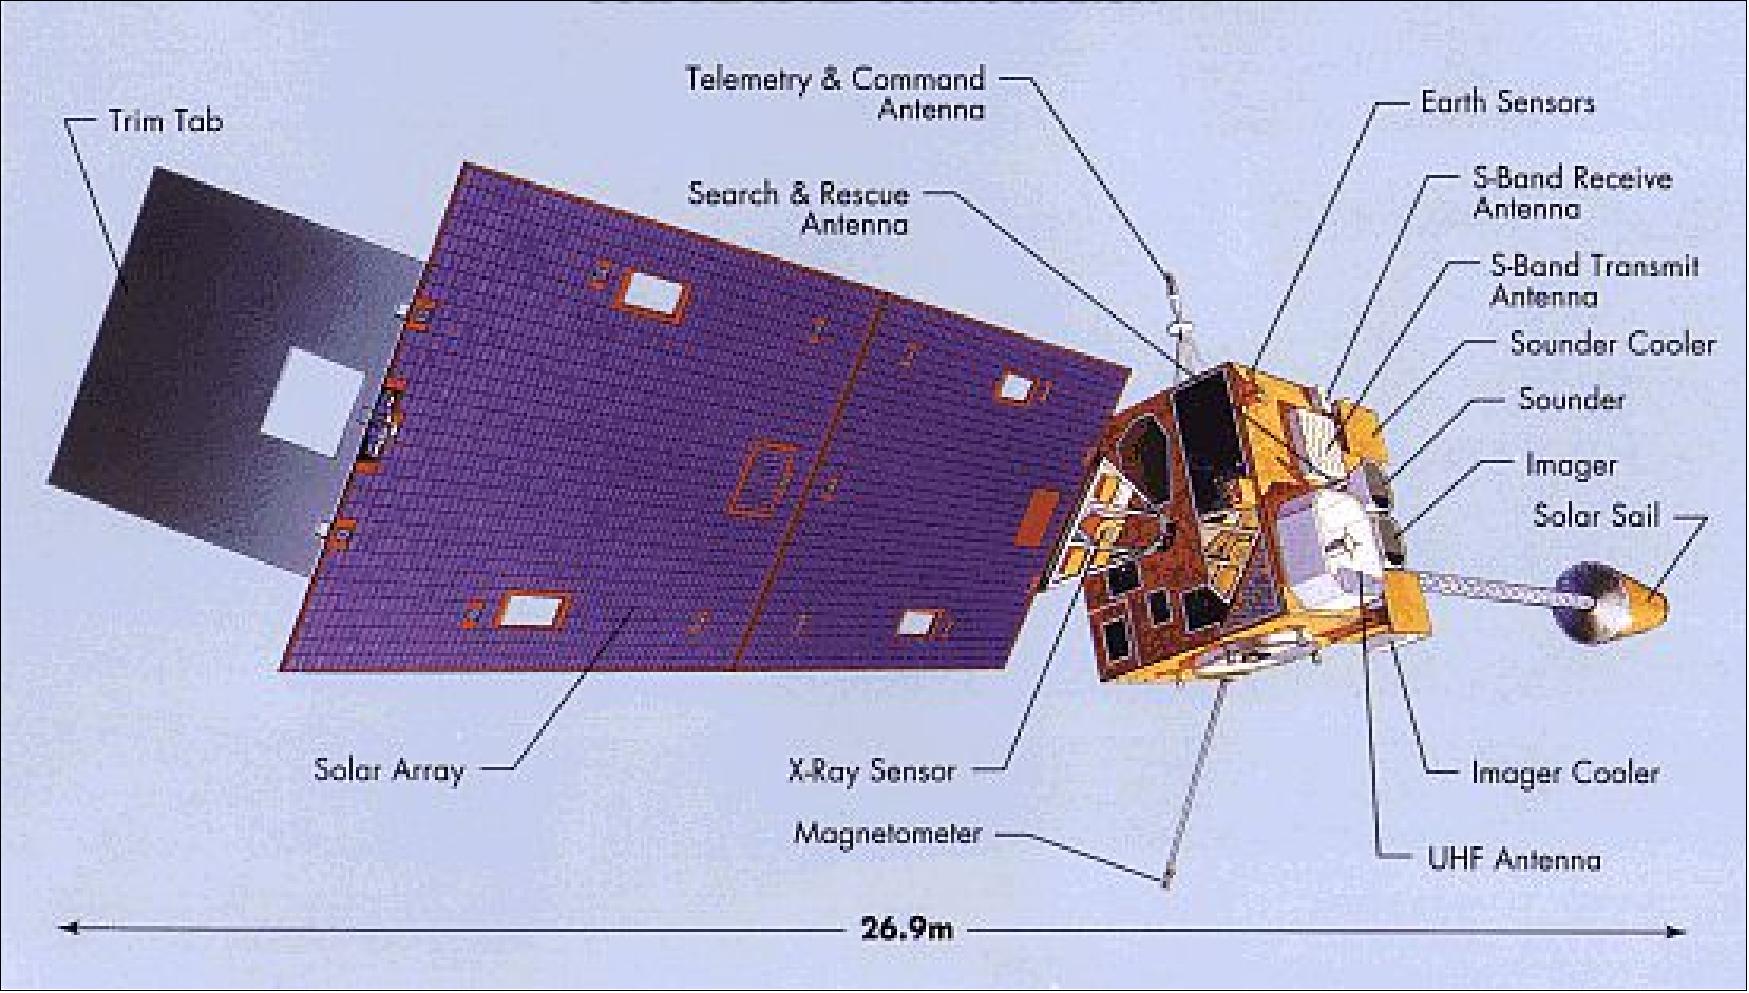 Figure 4: Illustration of the GOES 2nd generation spacecraft (image credit: NOAA)